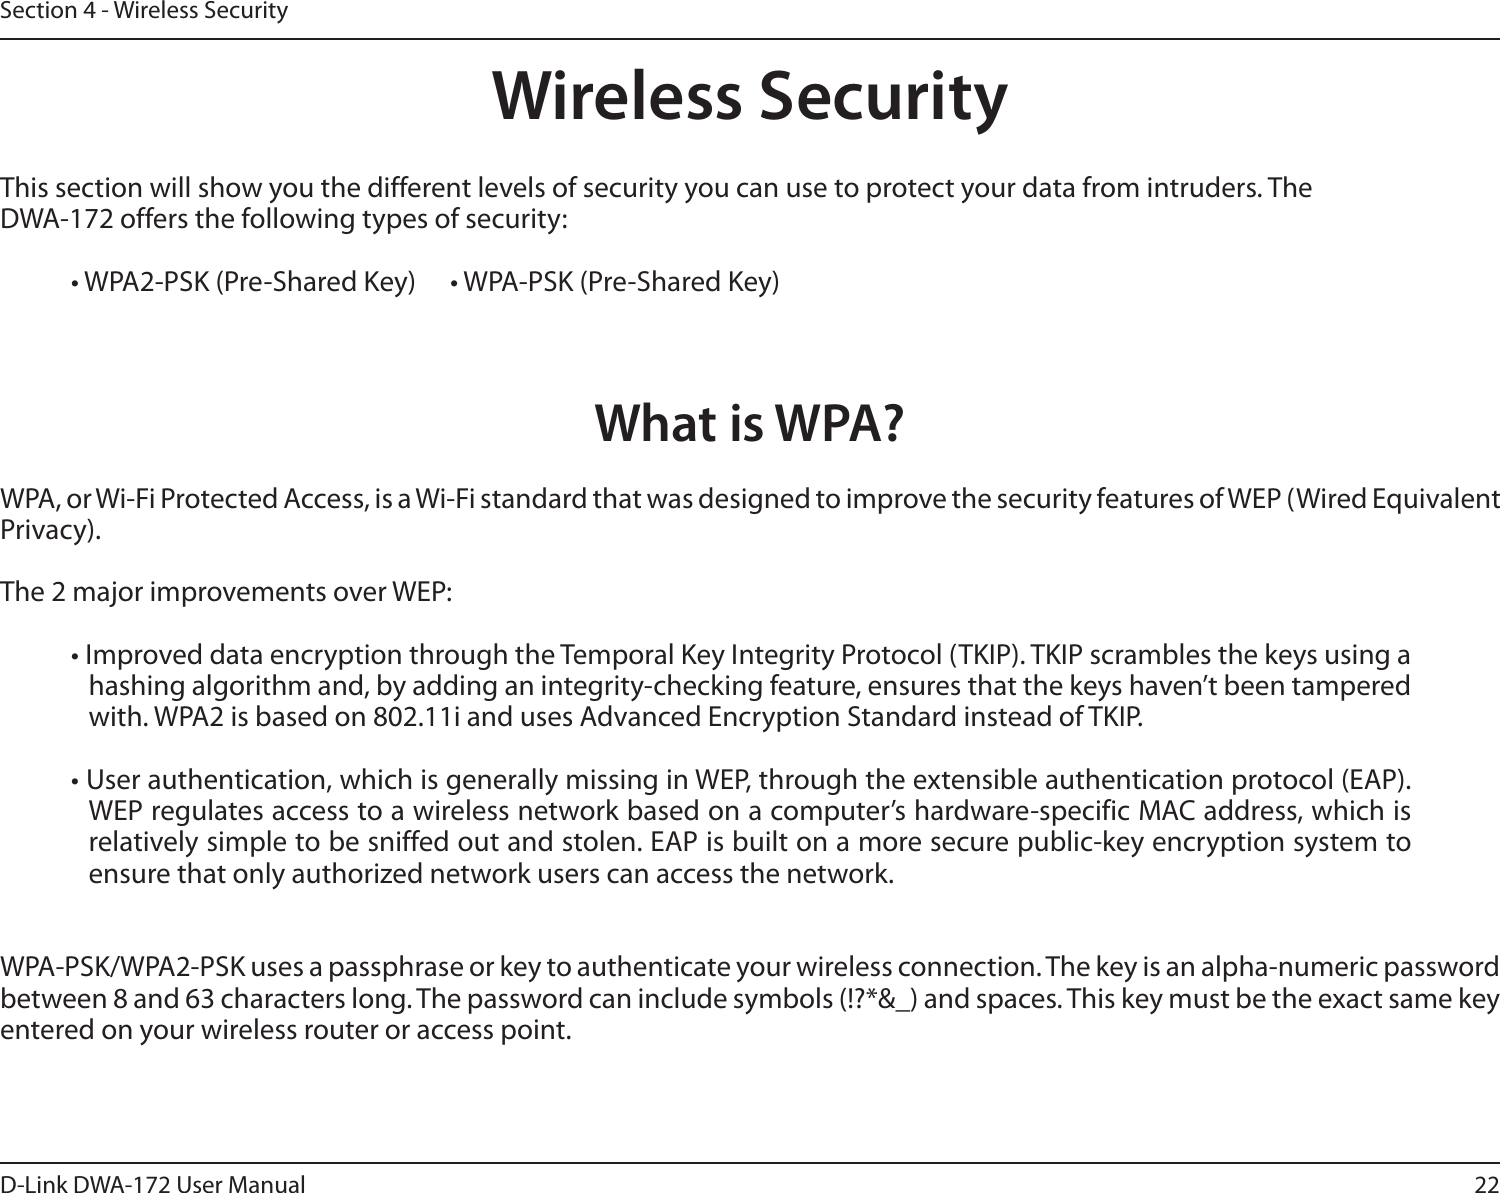 22D-Link DWA-172 User ManualSection 4 - Wireless SecurityWireless SecurityThis section will show you the different levels of security you can use to protect your data from intruders. The DWA-172 offers the following types of security:• WPA2-PSK (Pre-Shared Key)    • WPA-PSK (Pre-Shared Key)What is WPA?WPA, or Wi-Fi Protected Access, is a Wi-Fi standard that was designed to improve the security features of WEP (Wired Equivalent Privacy).  The 2 major improvements over WEP: • Improved data encryption through the Temporal Key Integrity Protocol (TKIP). TKIP scrambles the keys using a hashing algorithm and, by adding an integrity-checking feature, ensures that the keys haven’t been tampered with. WPA2 is based on 802.11i and uses Advanced Encryption Standard instead of TKIP.• User authentication, which is generally missing in WEP, through the extensible authentication protocol (EAP). WEP regulates access to a wireless network based on a computer’s hardware-specific MAC address, which is relatively simple to be sniffed out and stolen. EAP is built on a more secure public-key encryption system to ensure that only authorized network users can access the network.WPA-PSK/WPA2-PSK uses a passphrase or key to authenticate your wireless connection. The key is an alpha-numeric password between 8 and 63 characters long. The password can include symbols (!?*&amp;_) and spaces. This key must be the exact same key entered on your wireless router or access point.